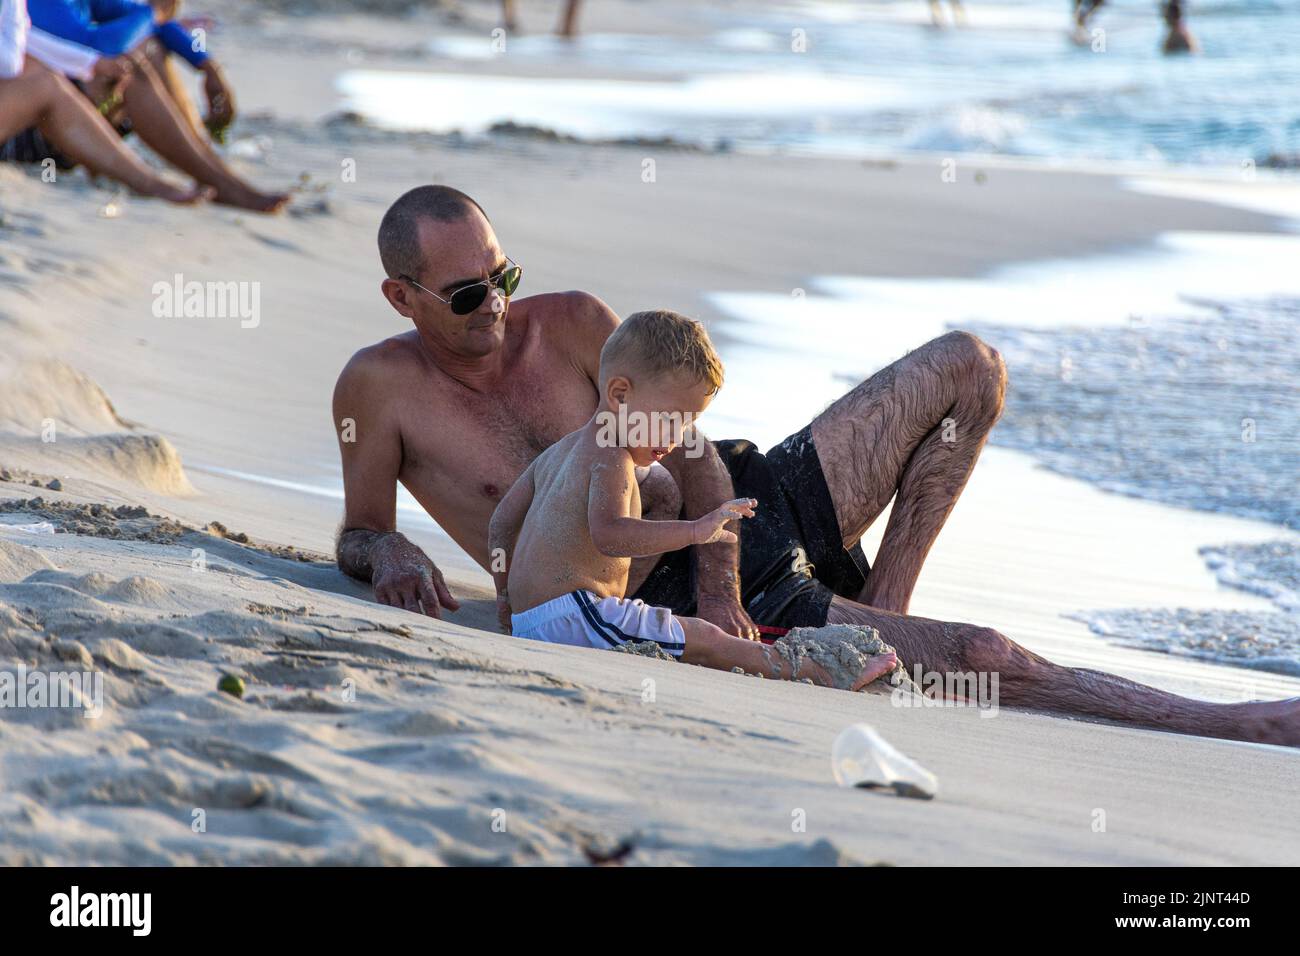 A Cuban, man in his 30's with his child playing on the beach, Varadero, Beach, Cuba. Stock Photo